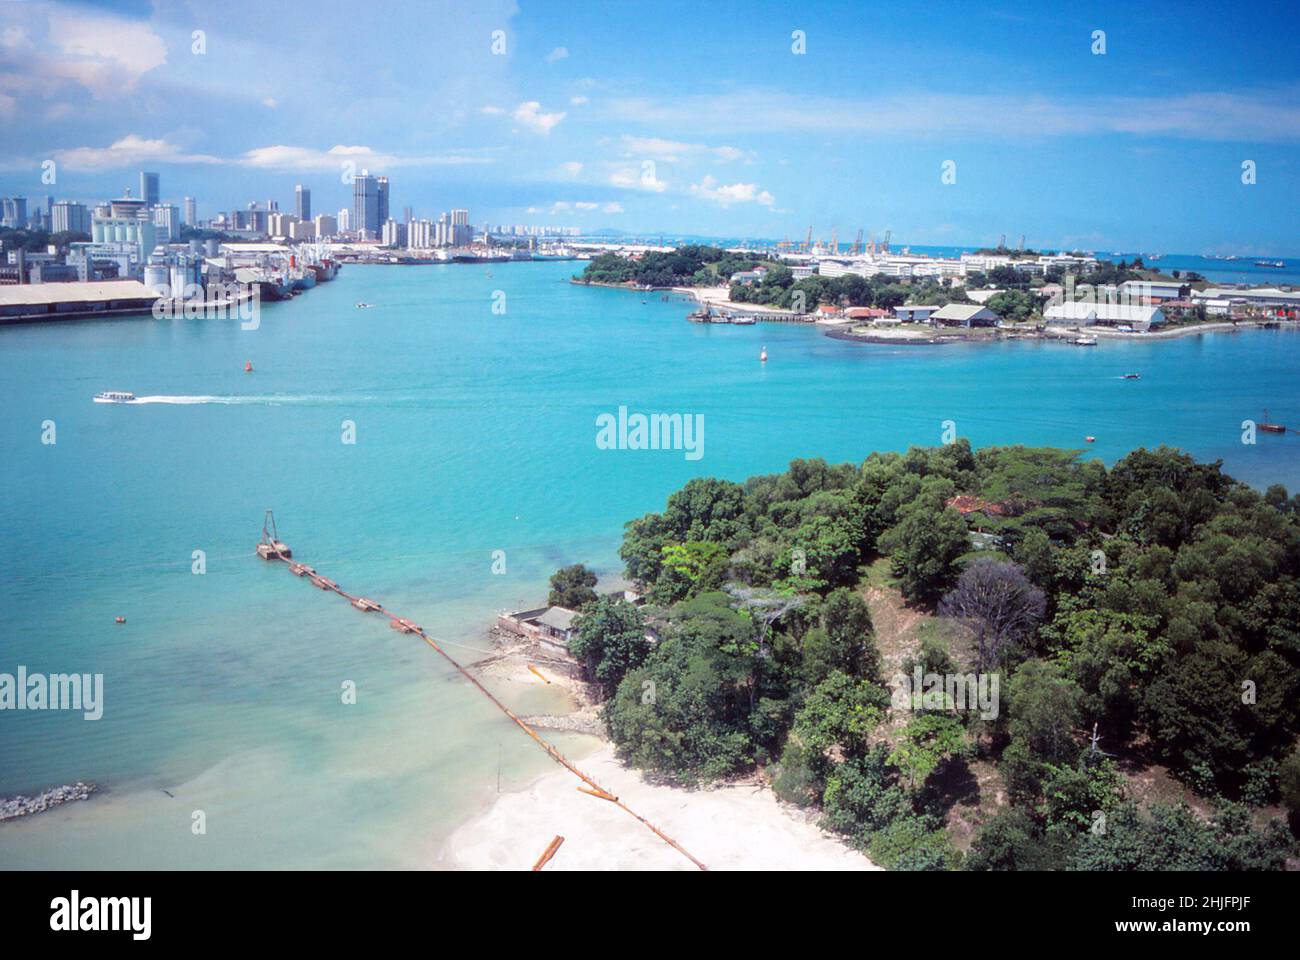 Singapore, Brani Island and Sentosa Island, Singapore, from cable car, 30th April 1978 Stock Photo